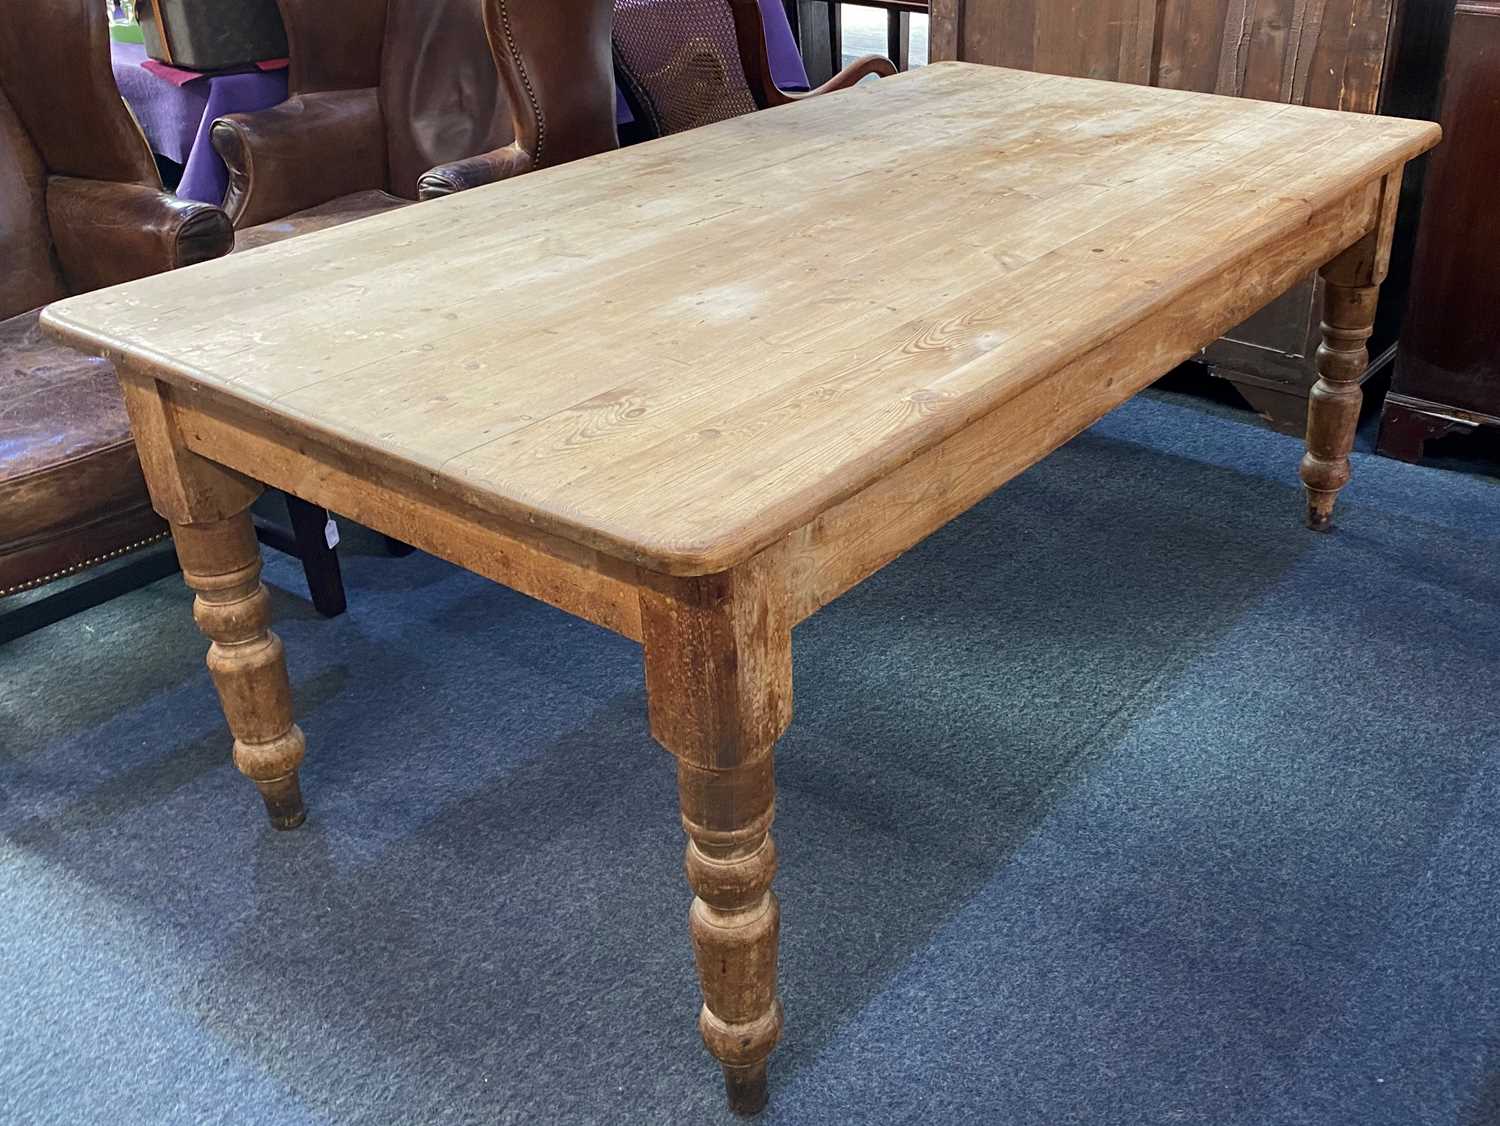 A pine farmhouse kitchen table, the rectangular plank top with rounded corners on turned legs